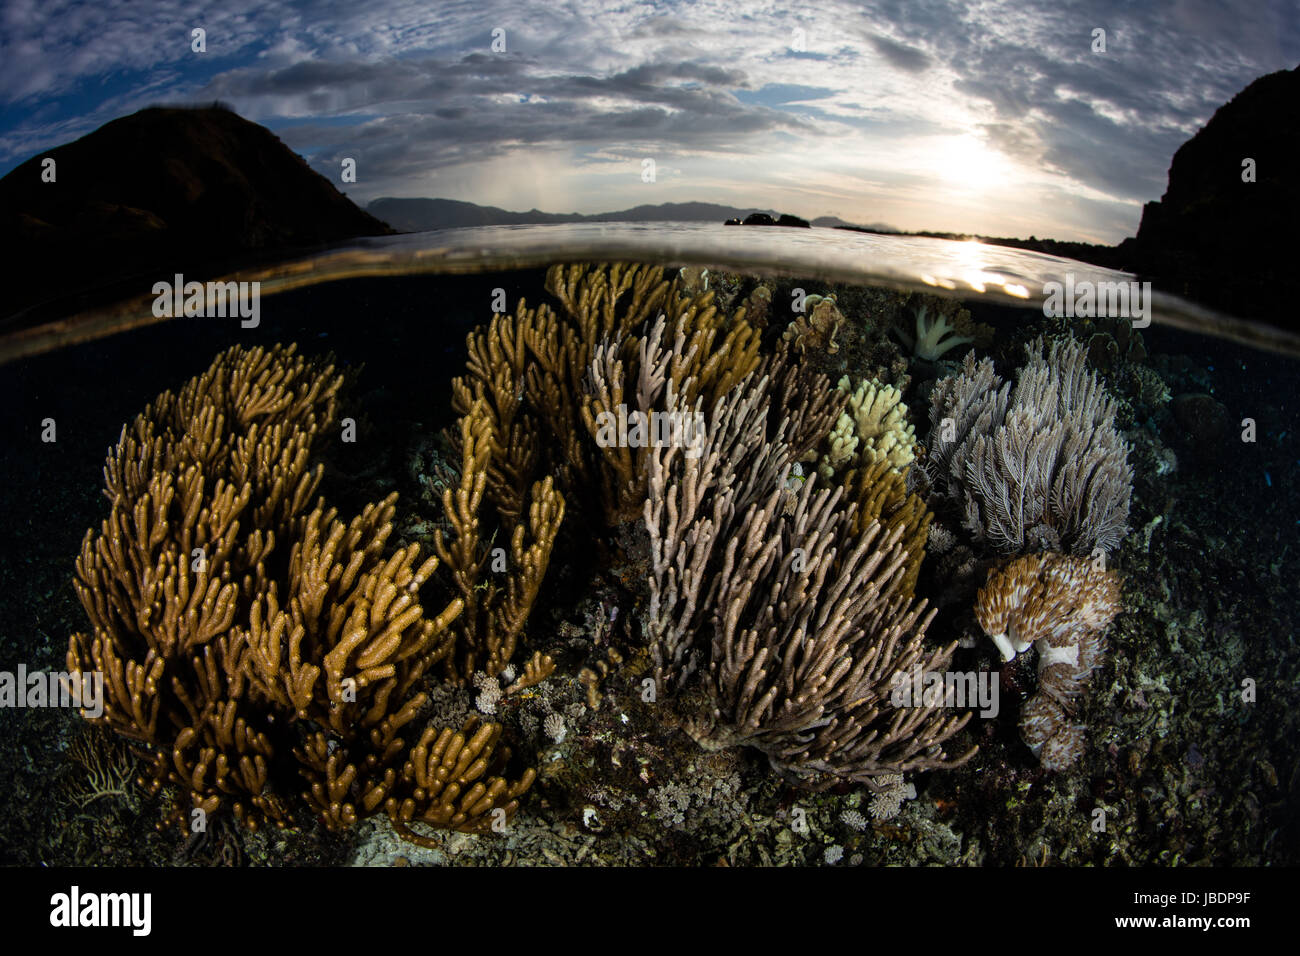 A shallow coral reef grows in Komodo National Park, Indonesia. This region harbors extraordinary marine biodiversity and is a popular vacation area. Stock Photo